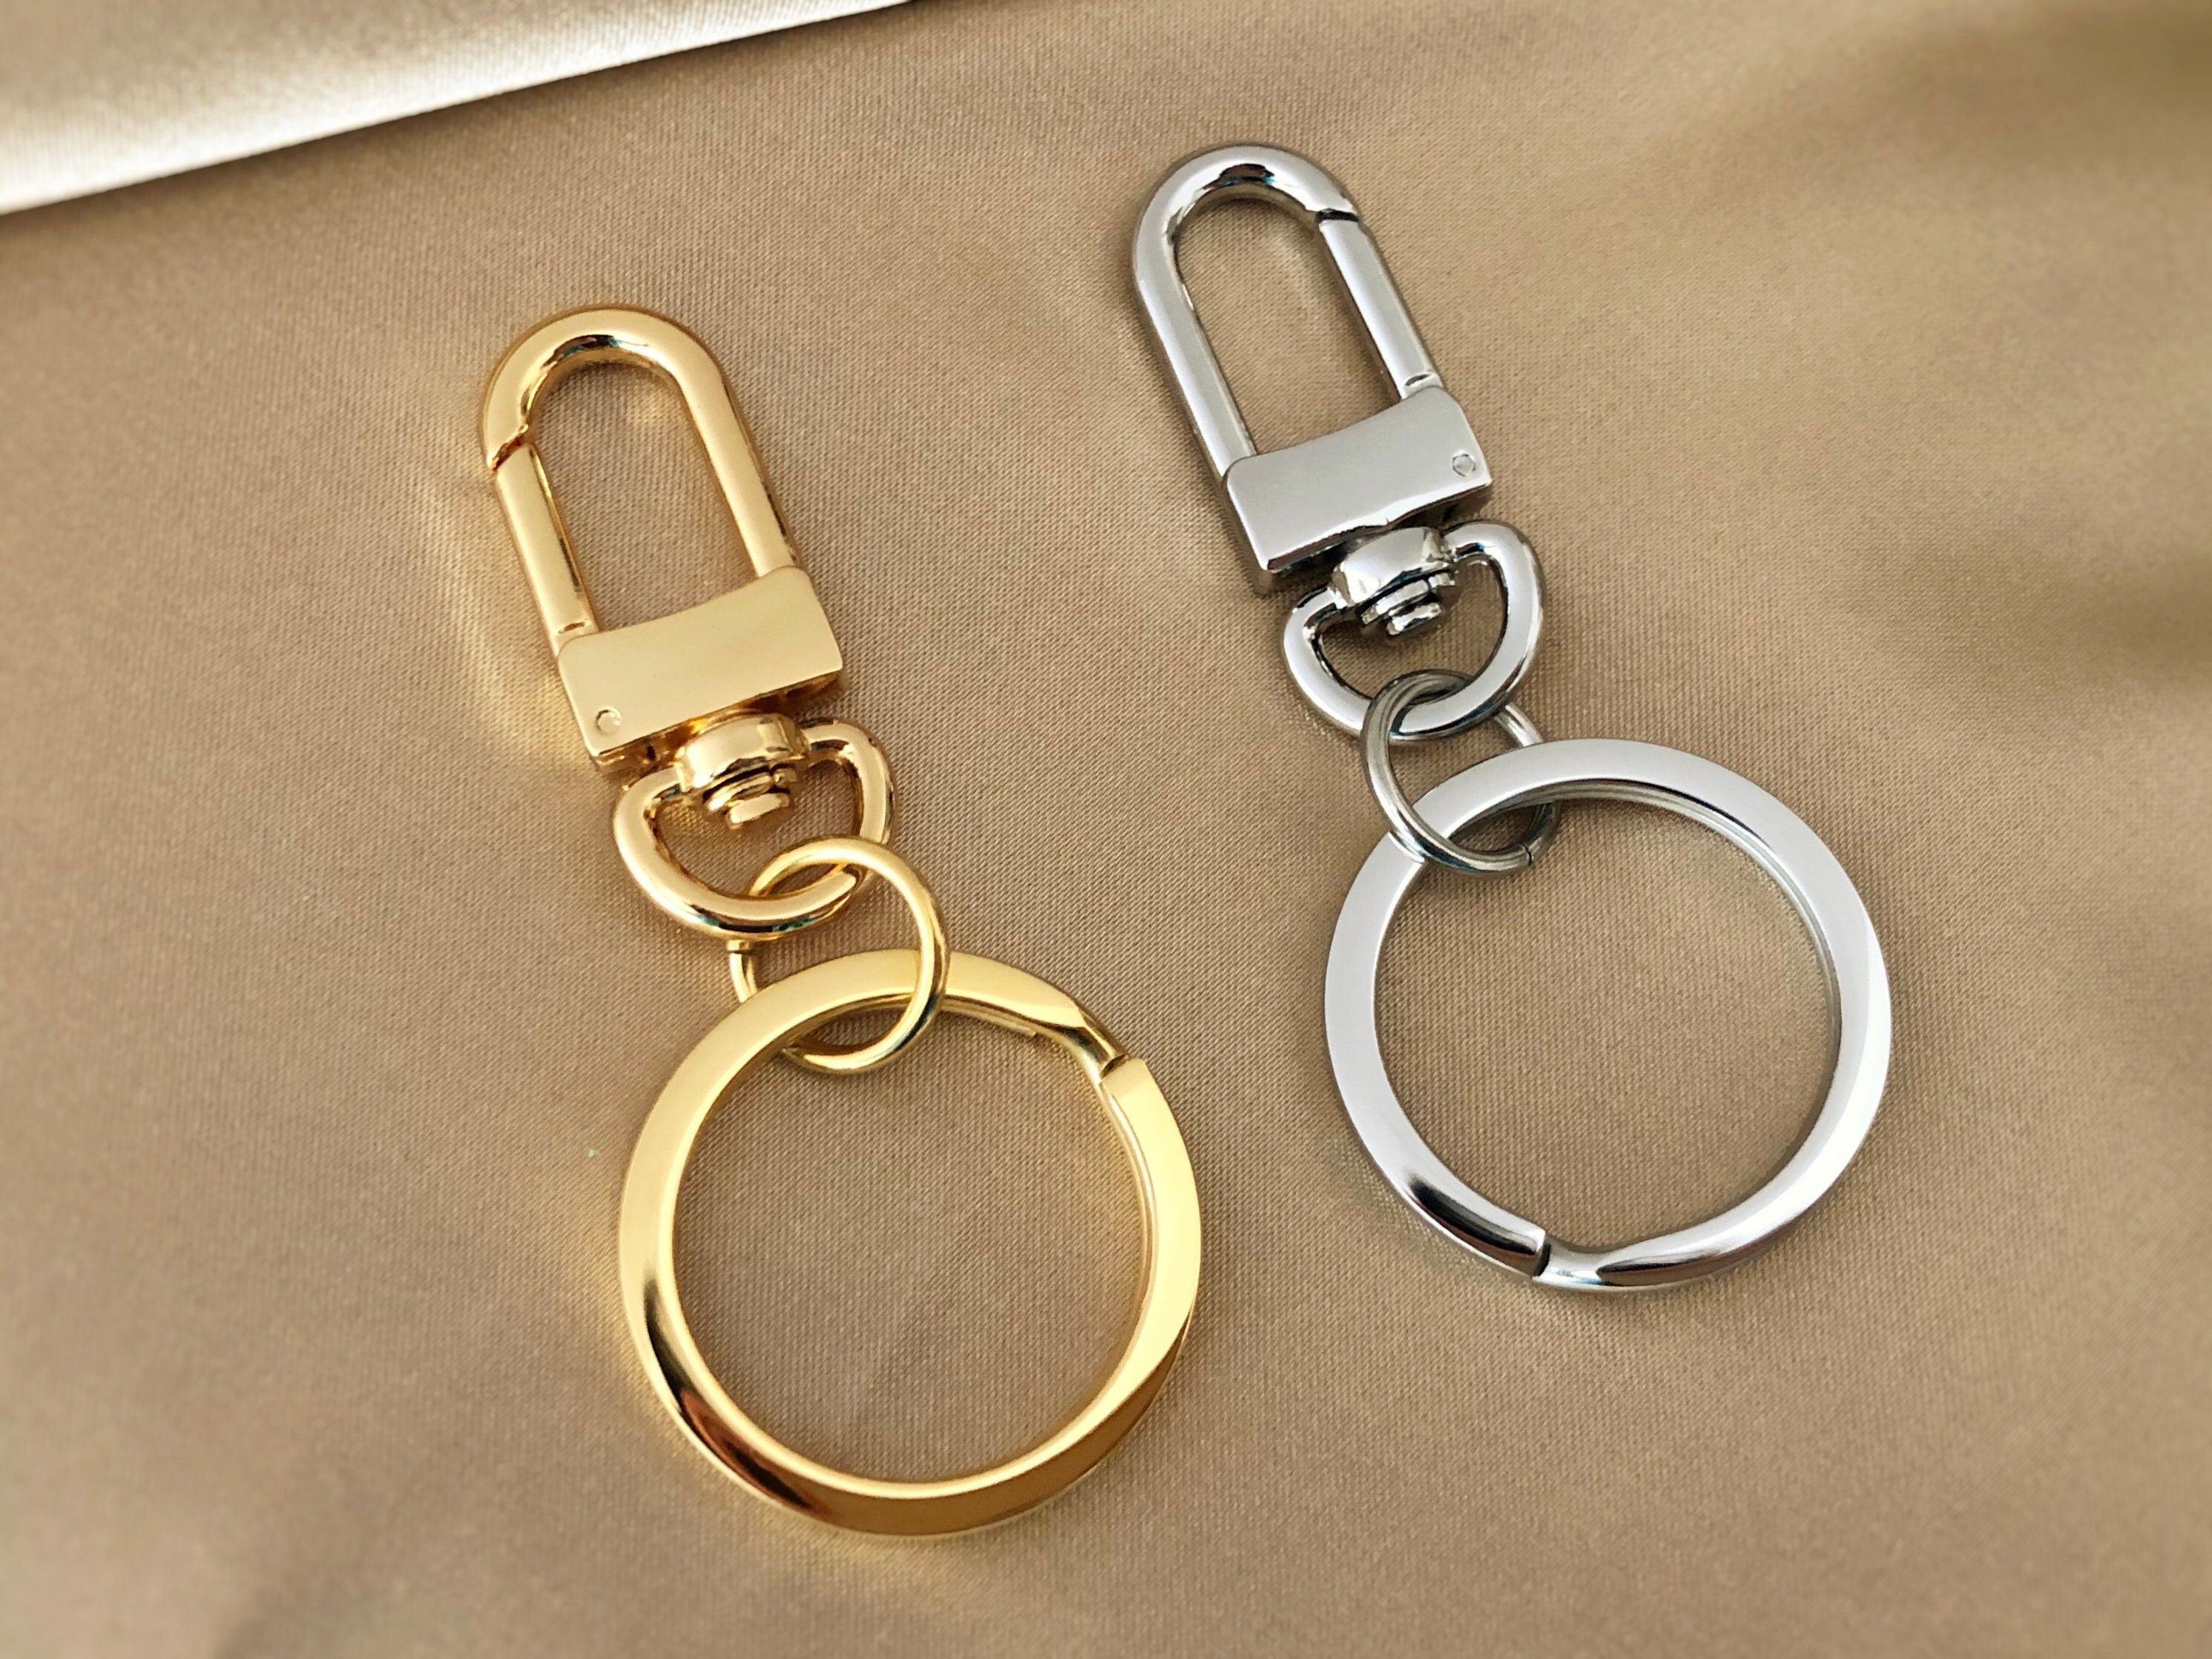 HONBAY 20pcs Zinc Alloy KC Gold Lobster Claw Clasp Keychain, Key Ring Loop  Key Holders with Flat Split Ring